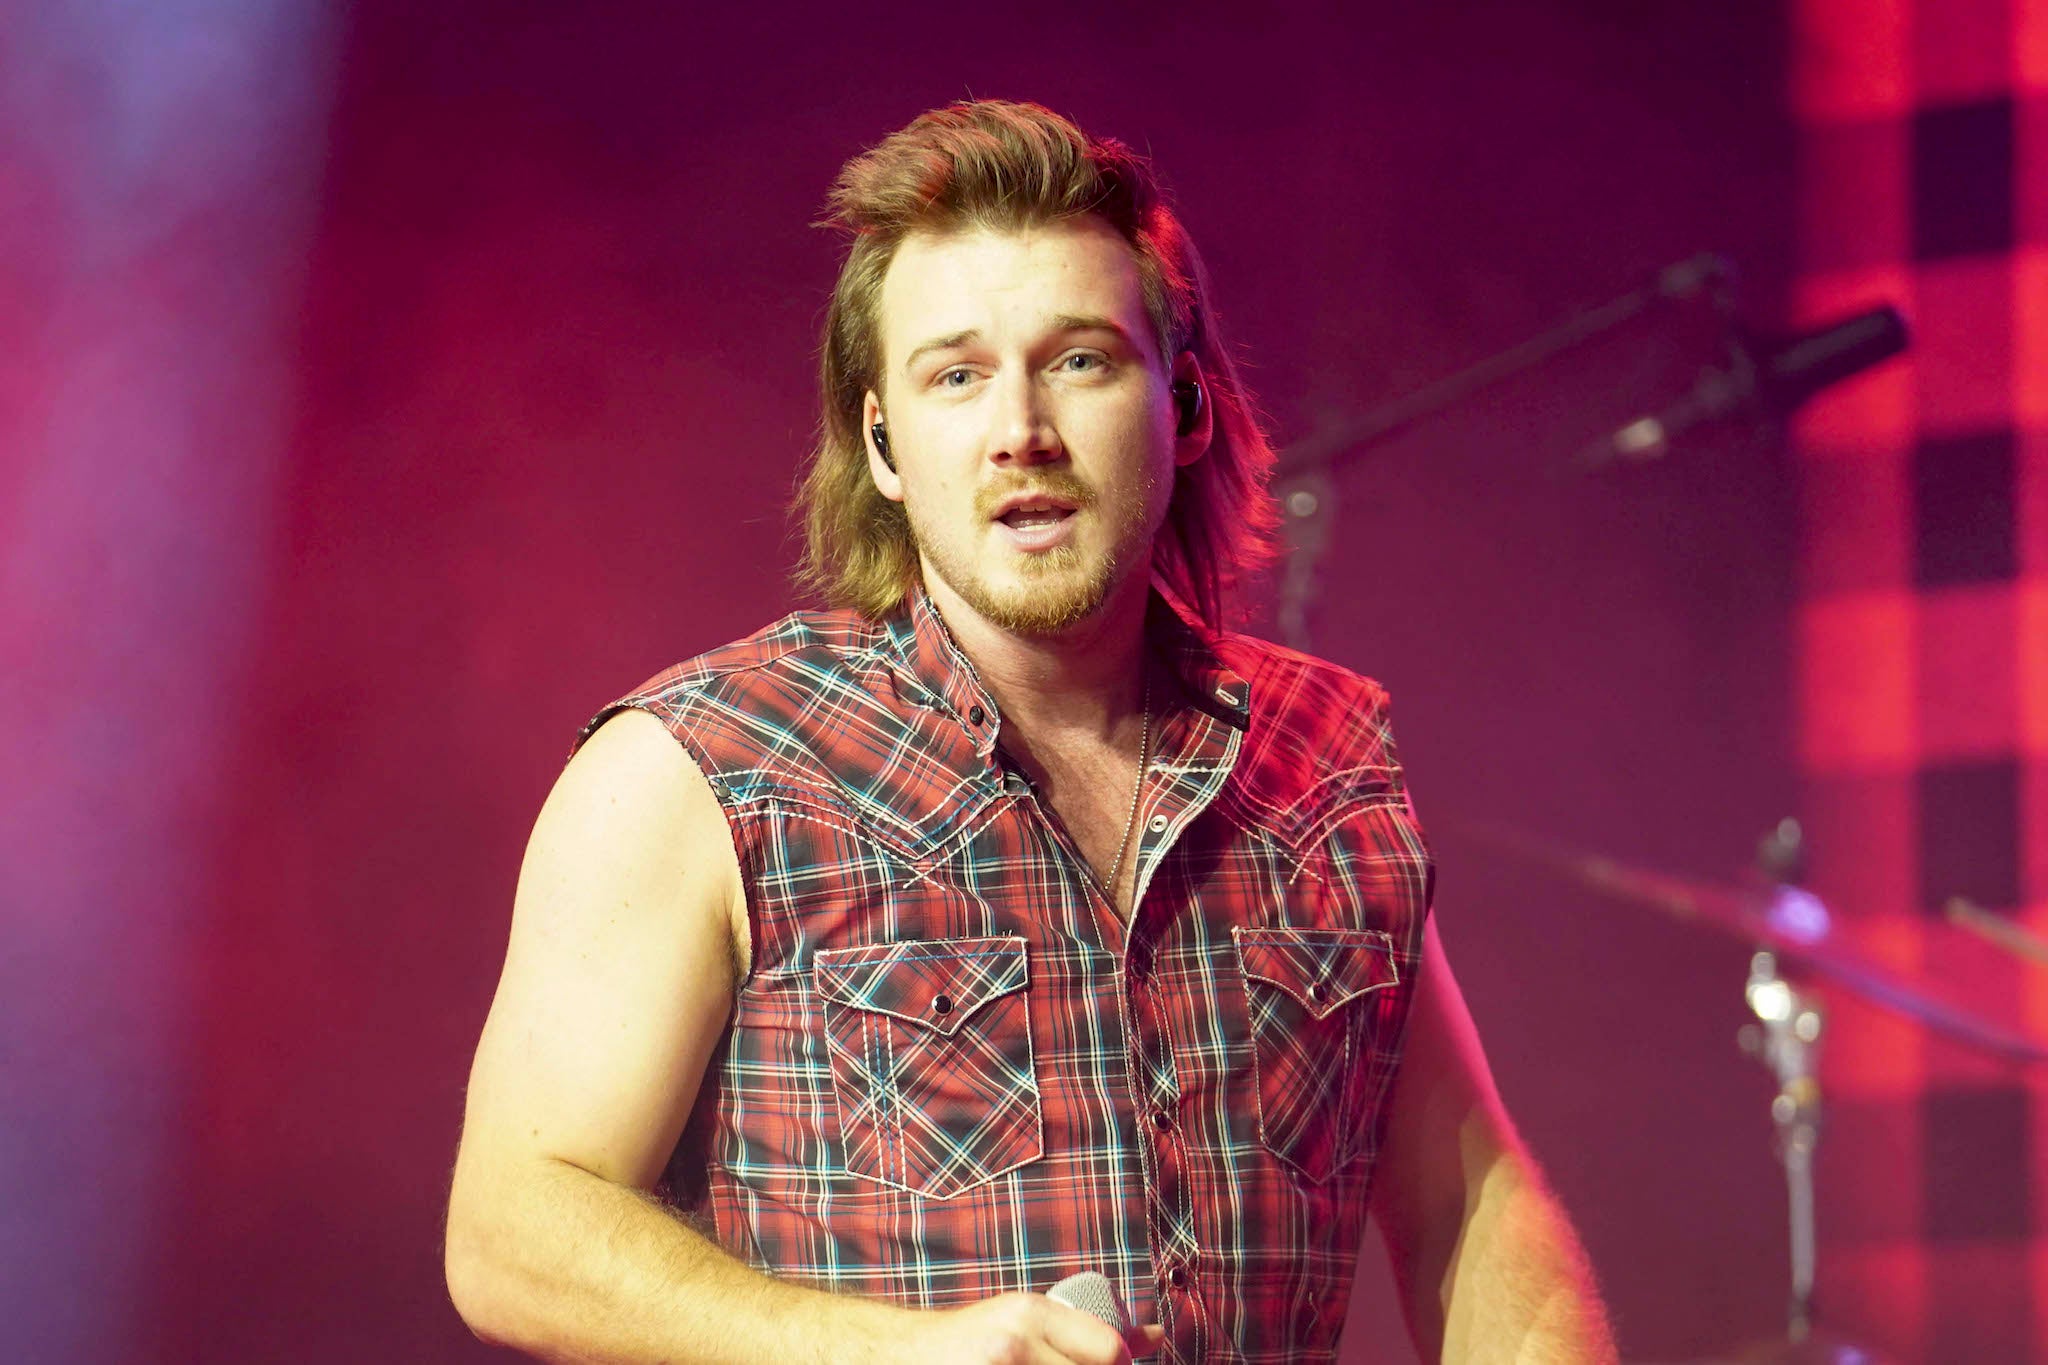 Morgan Wallen’s rapid rise to the top has been interrupted by a series of controversies